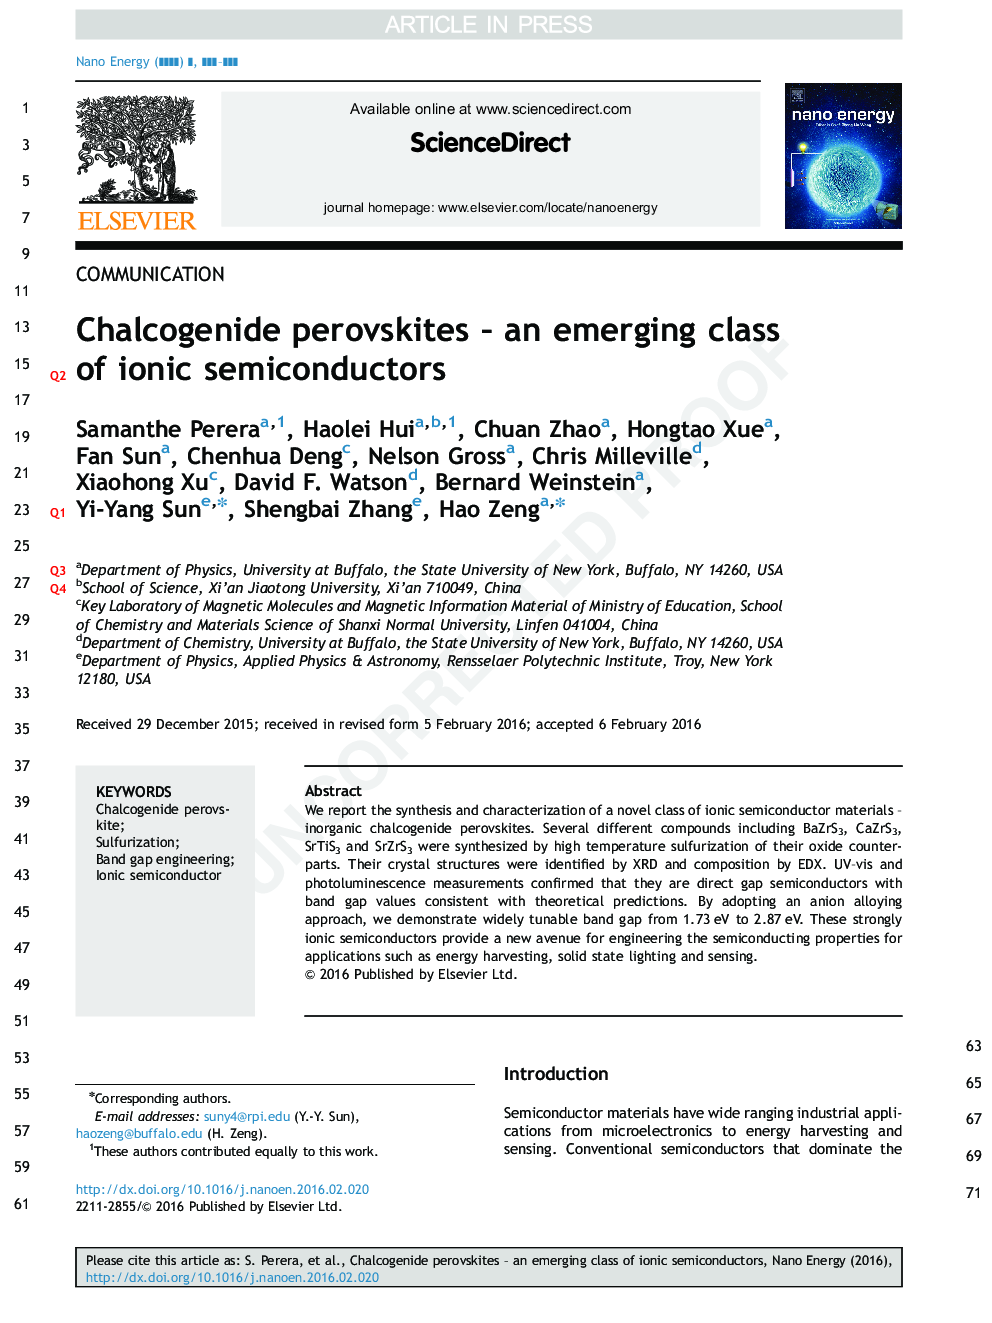 Chalcogenide perovskites - an emerging class of ionic semiconductors